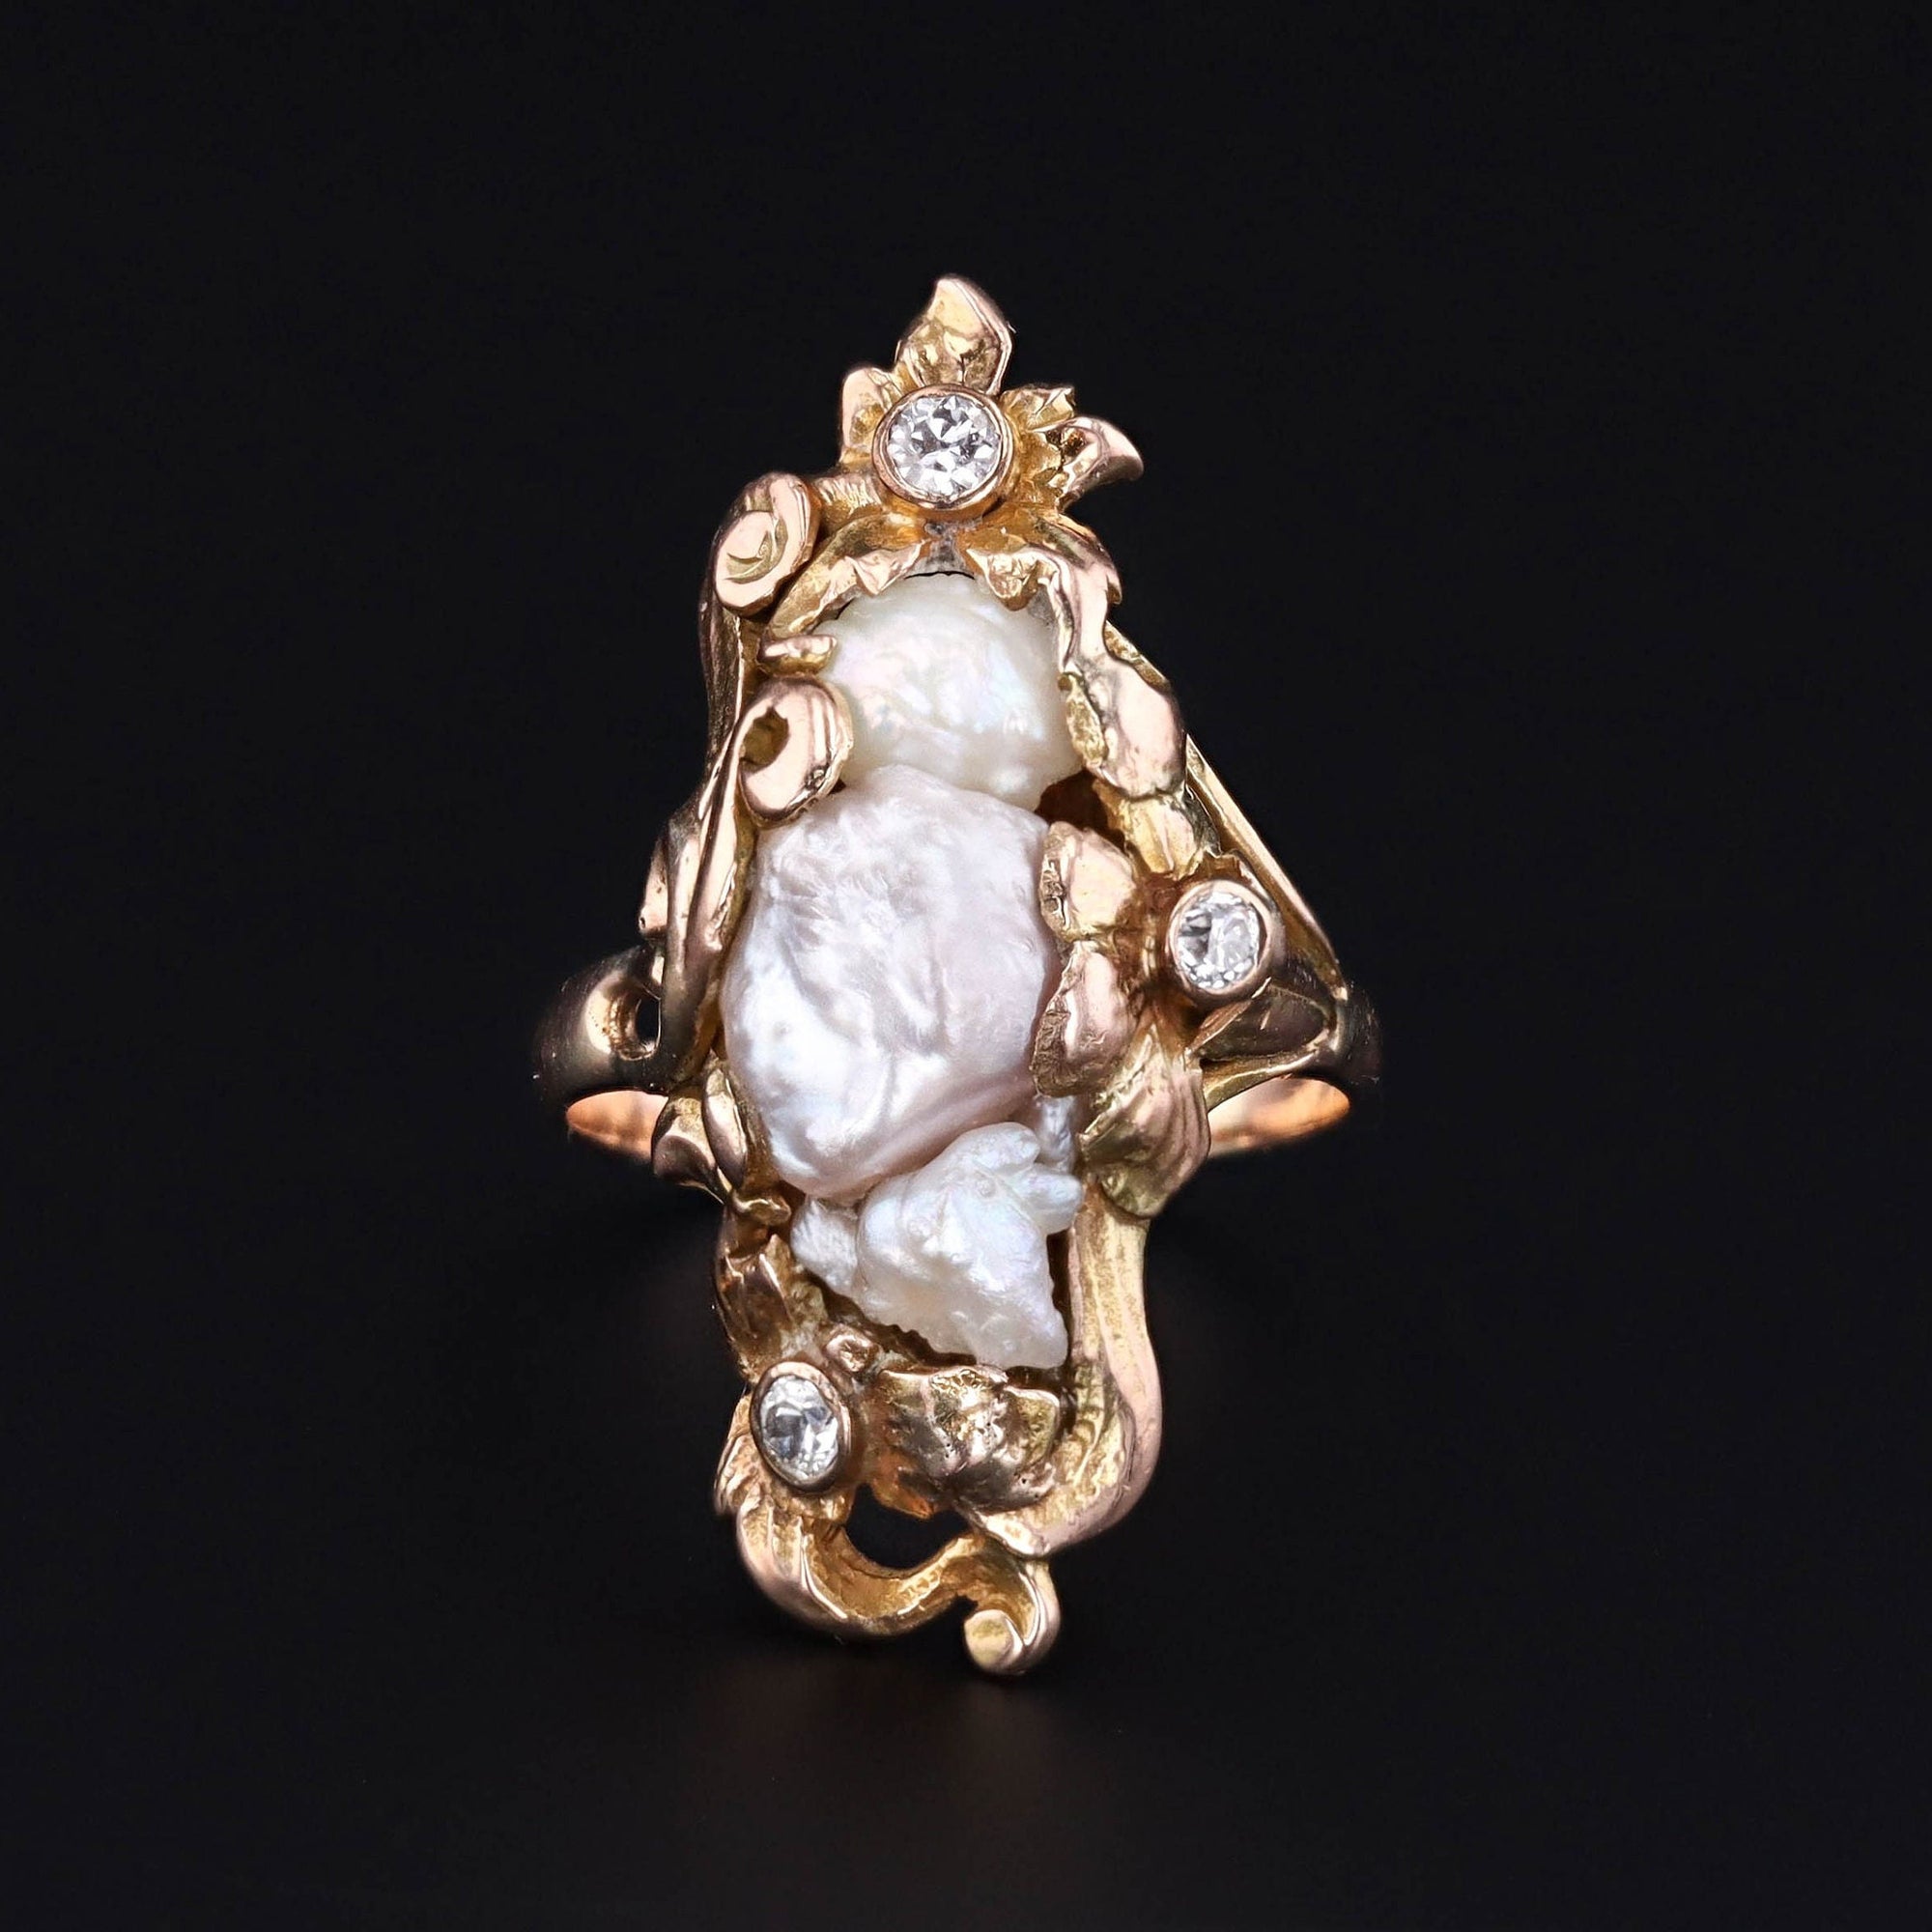 Antique Pearl Ring | 14k Gold Pearl & Diamond Ring 